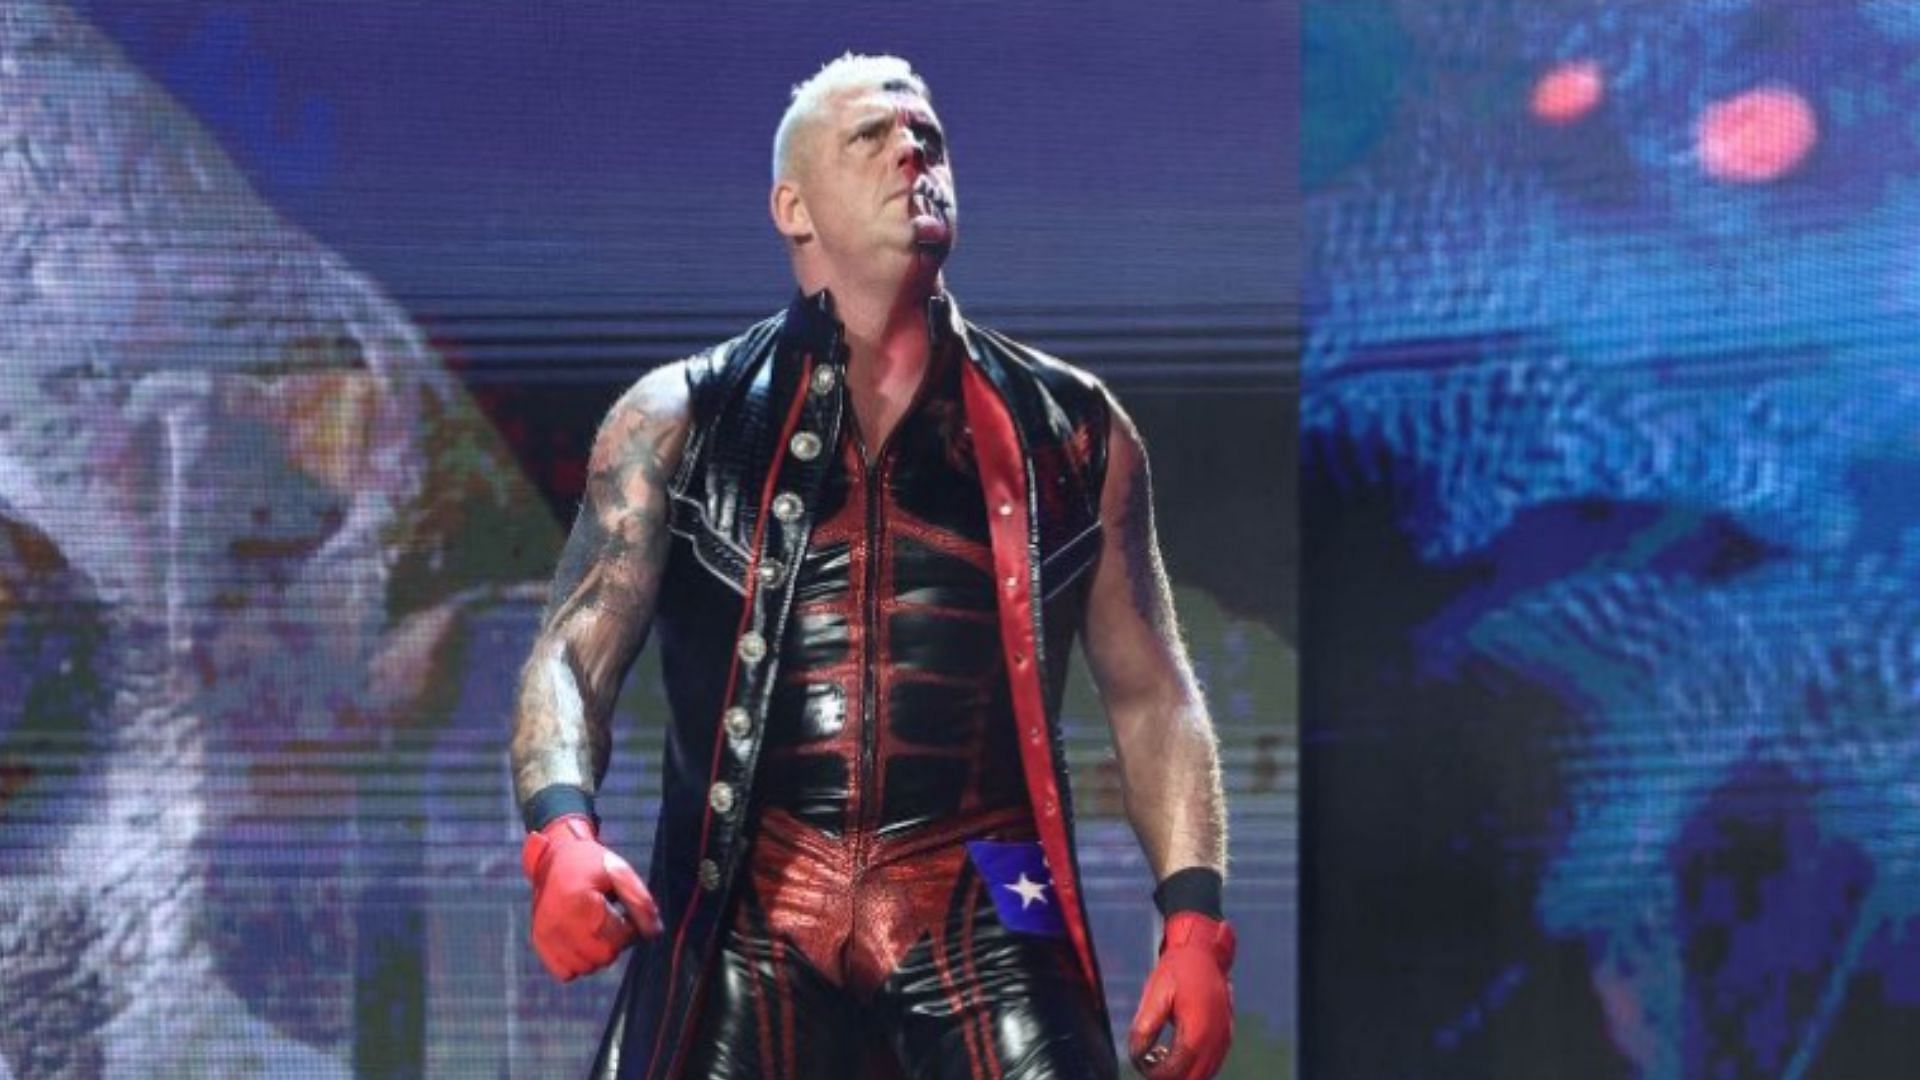 Dustin Rhodes is a former WWE Intercontinental Champion [Image Credits: Rhodes